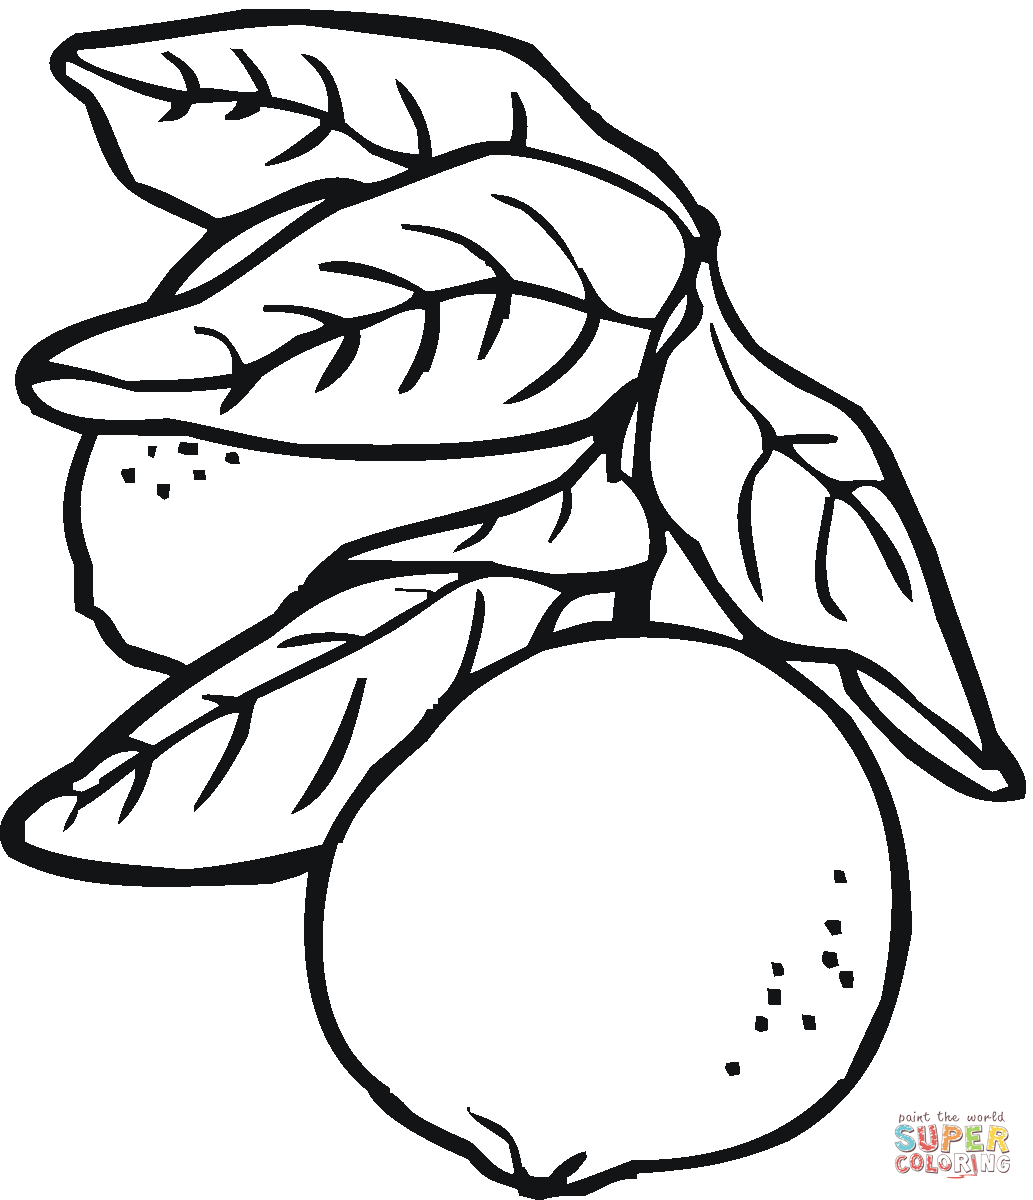 Lime coloring page | Free Printable Coloring Pages